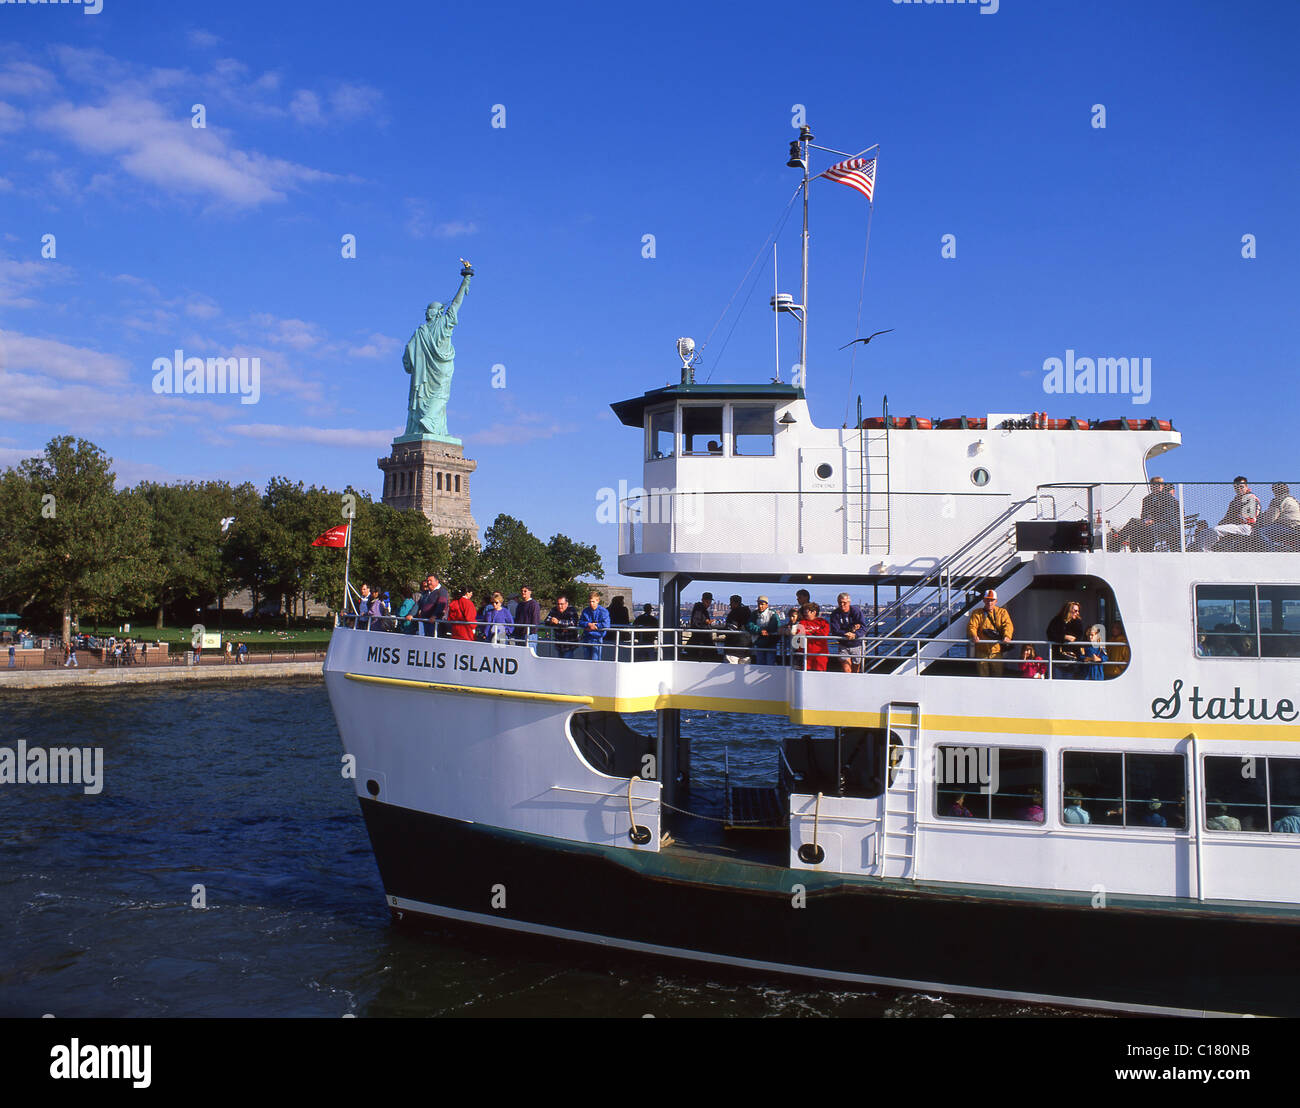 Miss Ellis Island Ferry passing Statue of Liberty National Monument, Liberty Island, New York, New York State, United States of America Stock Photo